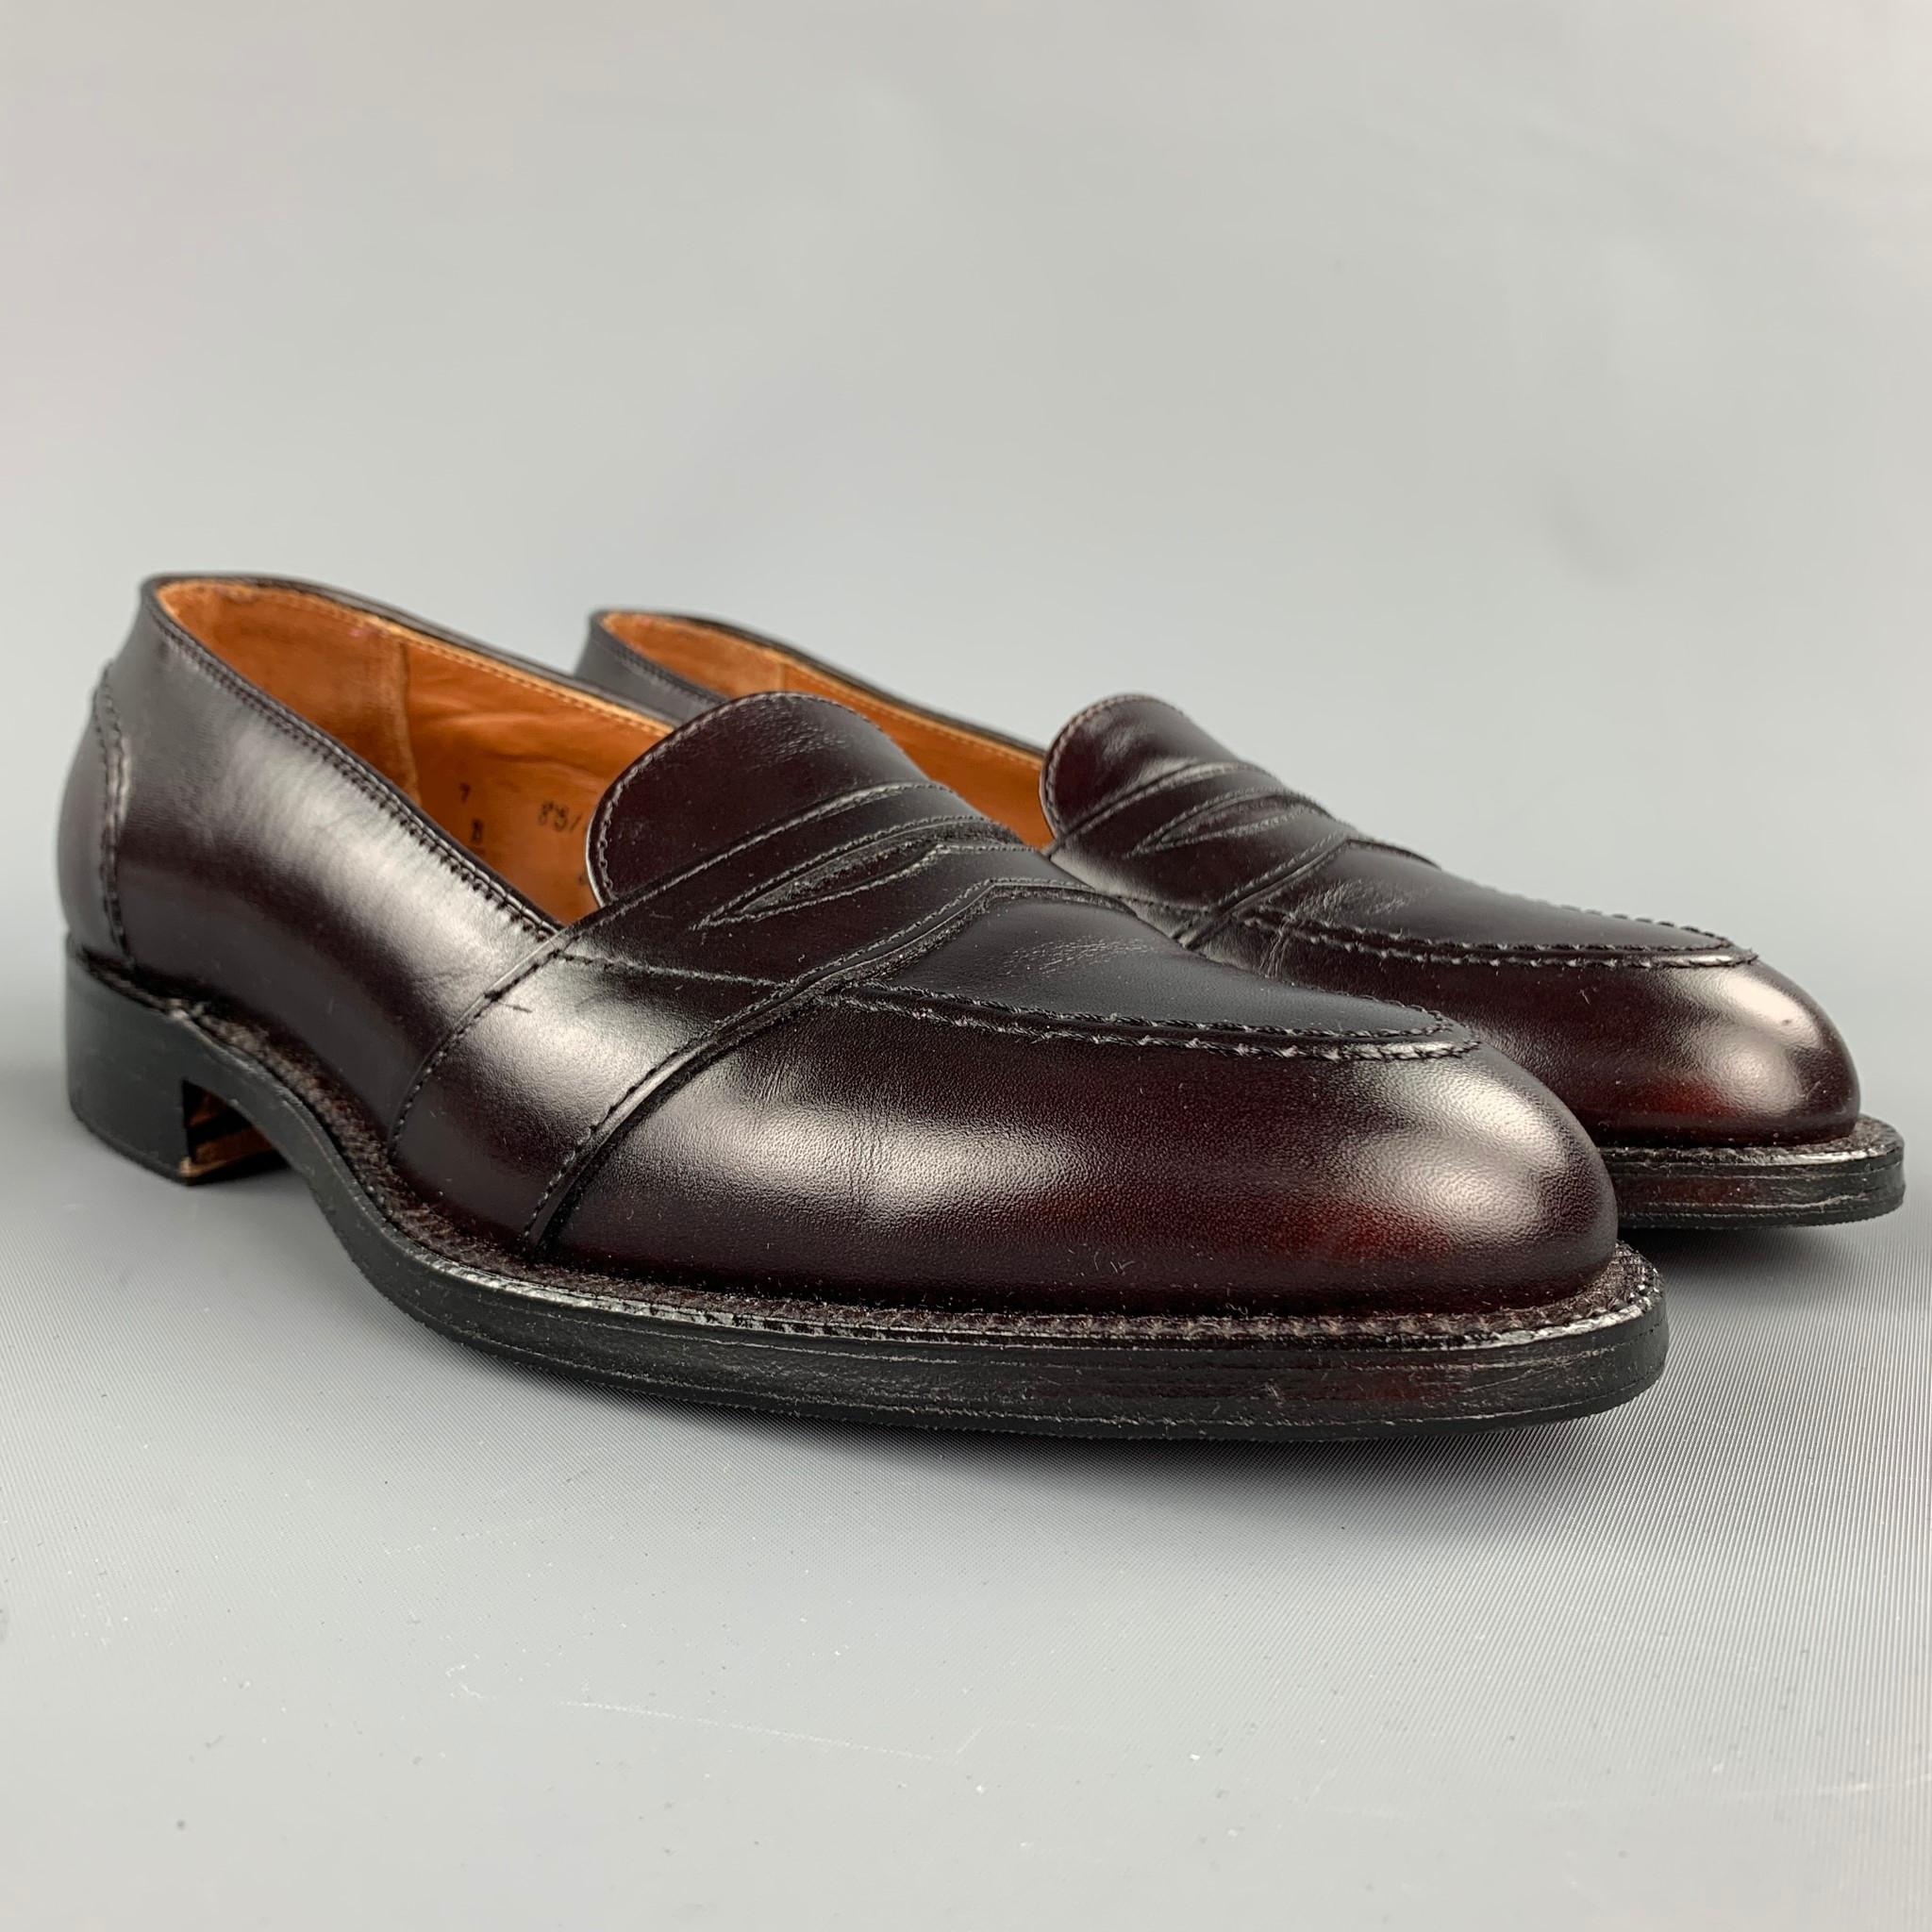 ALDEN loafers comes in a burgundy leather featuring a penny strap, leather insole, and a wooden sole. Made in USA.

New With Box. 
Marked: 7 D 683

Outsole: 11 in. x 4 in. 